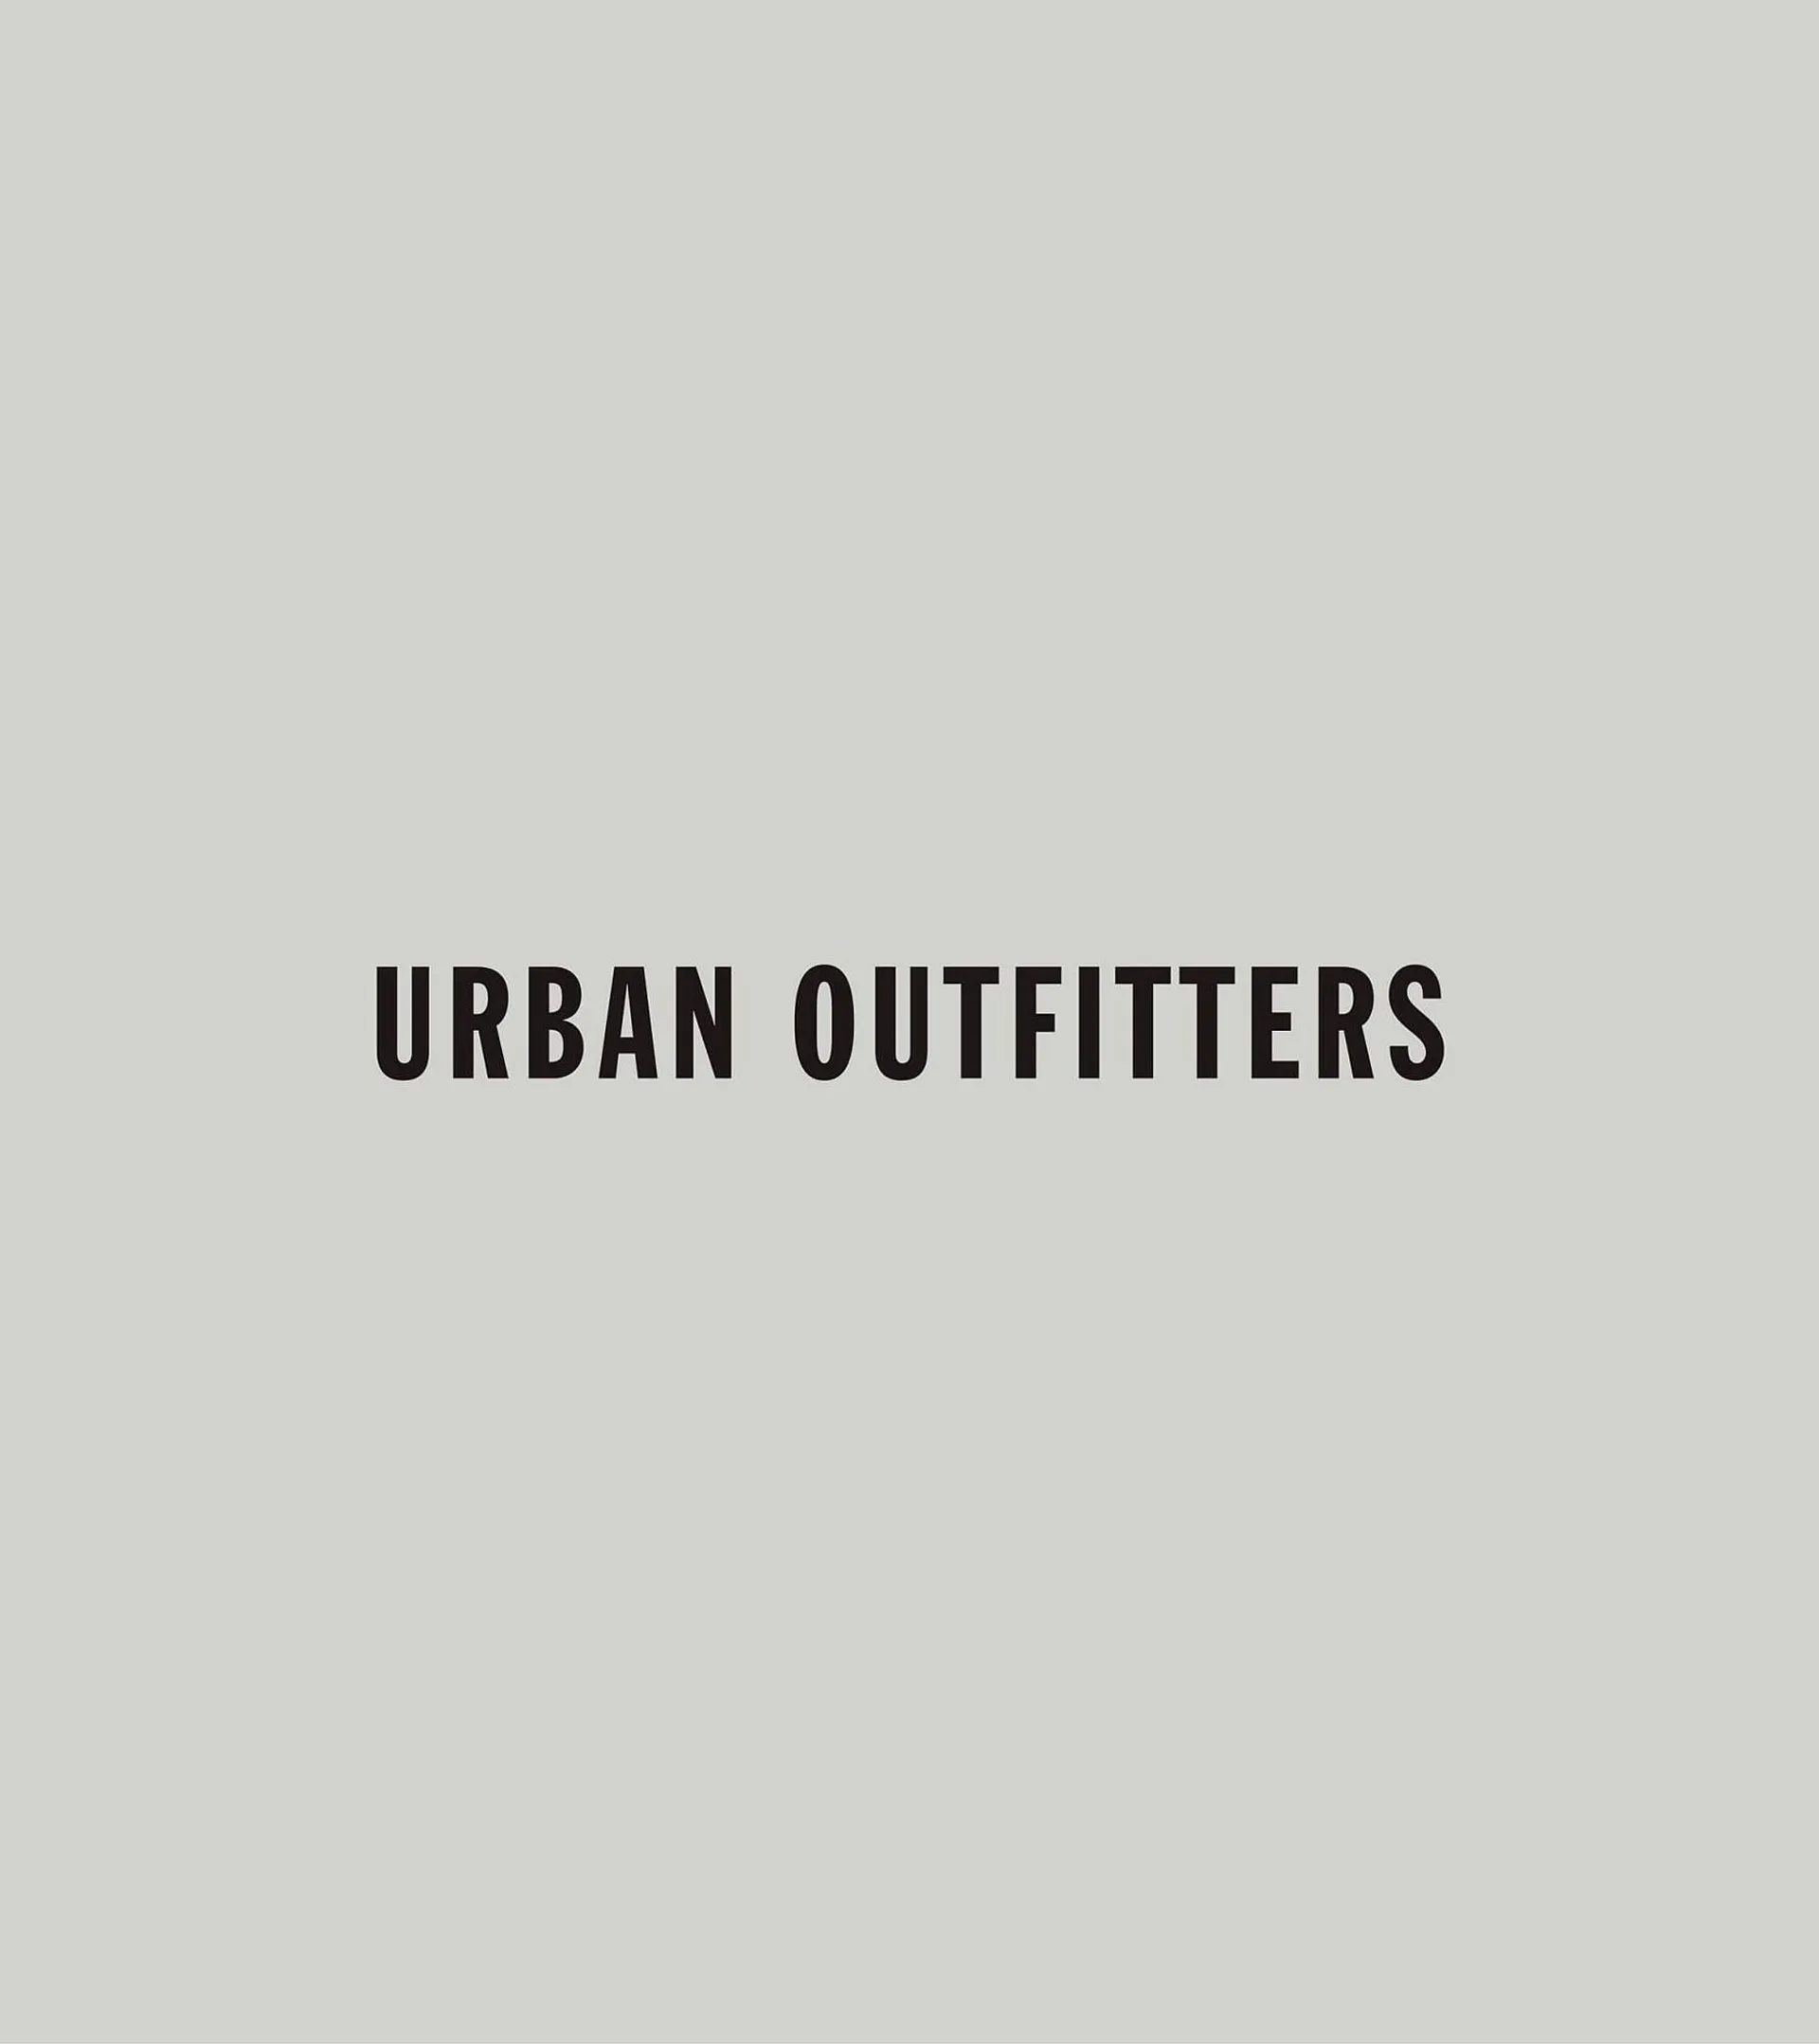 Urban Outfitters reklamblad - 8